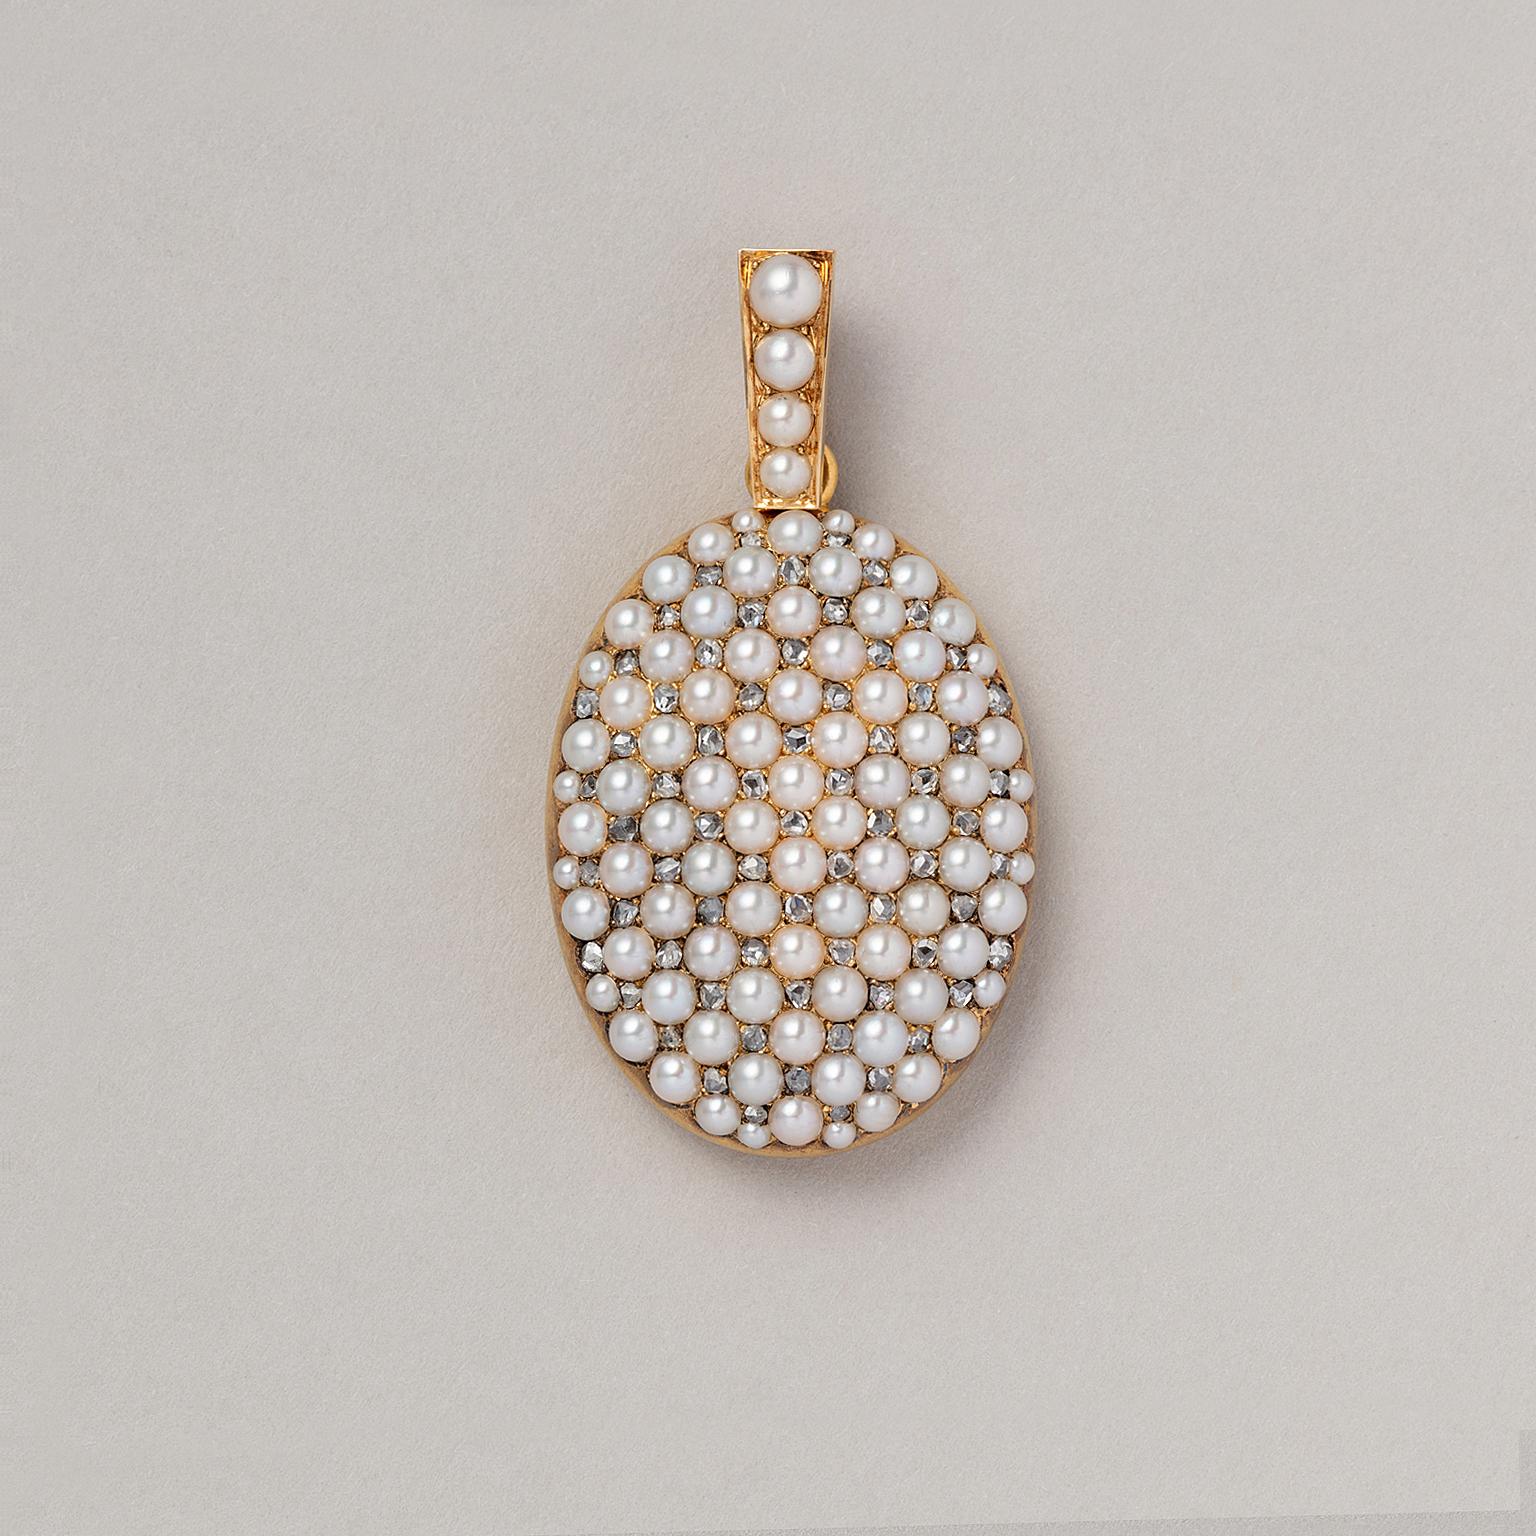 An 18 carat yellow gold locket with a grid of white half round pearls alternated with rose cut diamonds, and four halfround pearls on the bail descending in size  At the back is one removable glass, France, end 19th century.

weight: 25.66